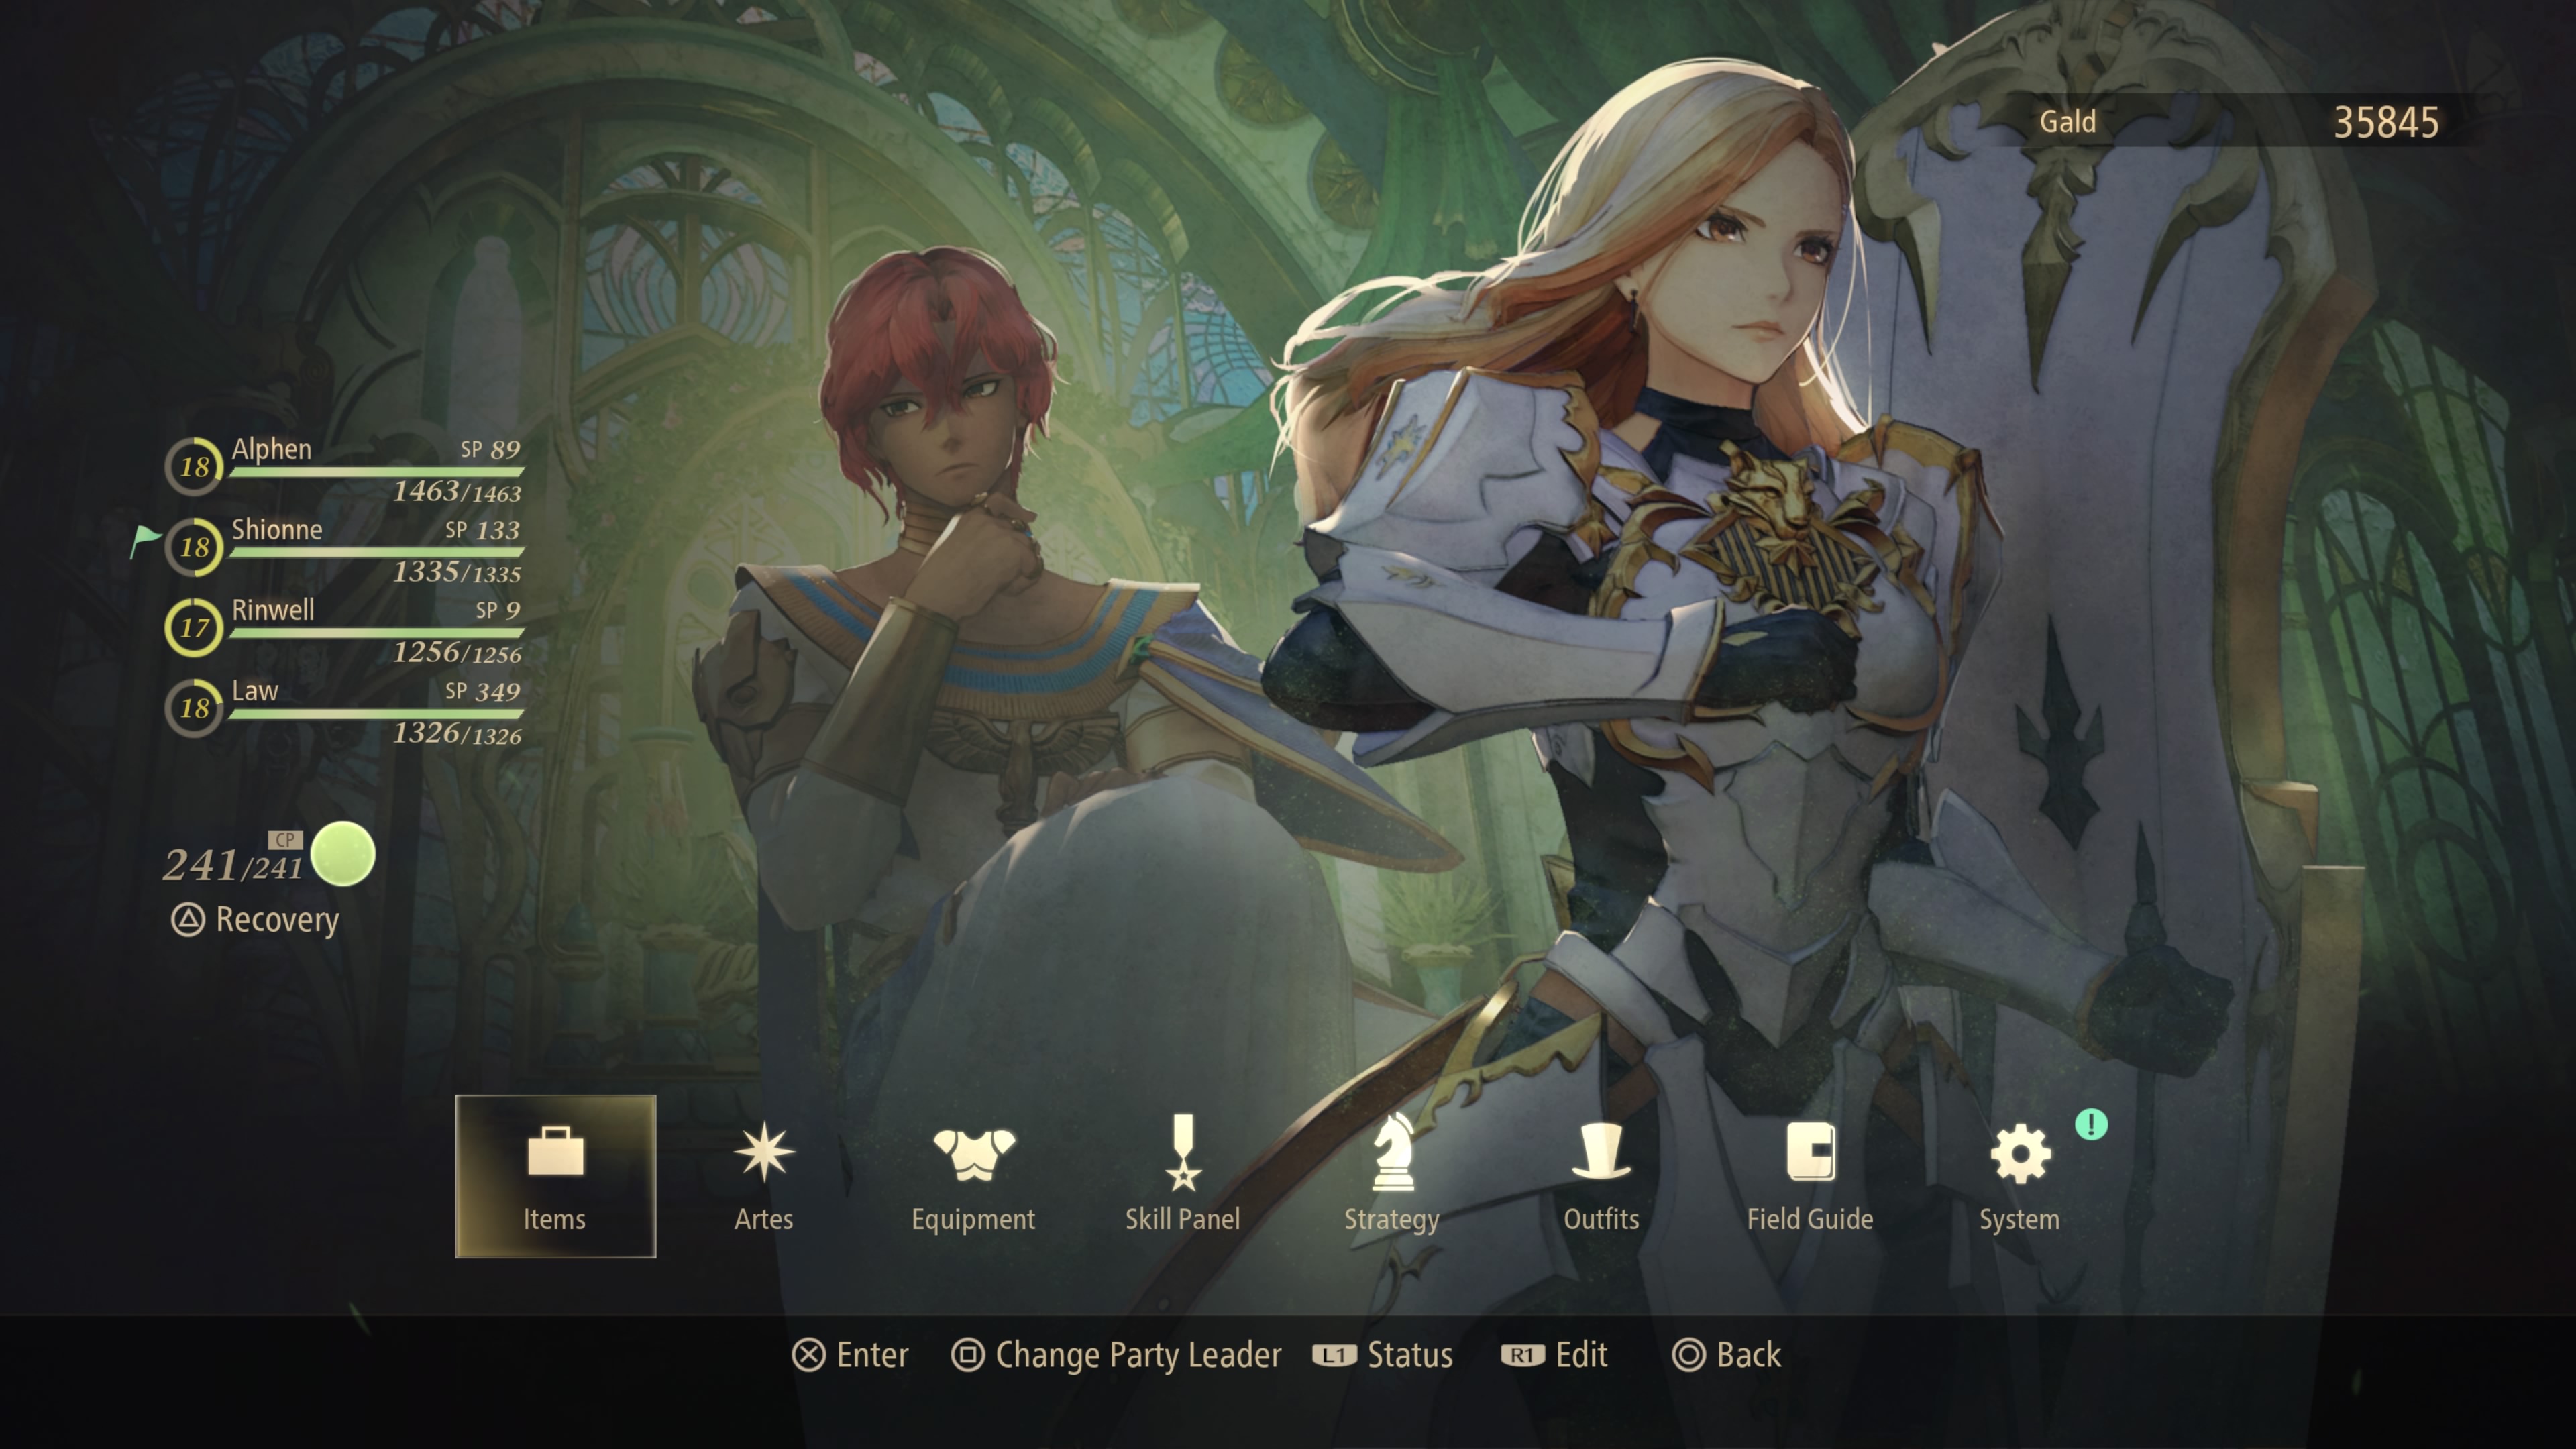 The menu for switching characters in Tales of Arise, showing Alphe, Shionne, Rinwell, and Law.